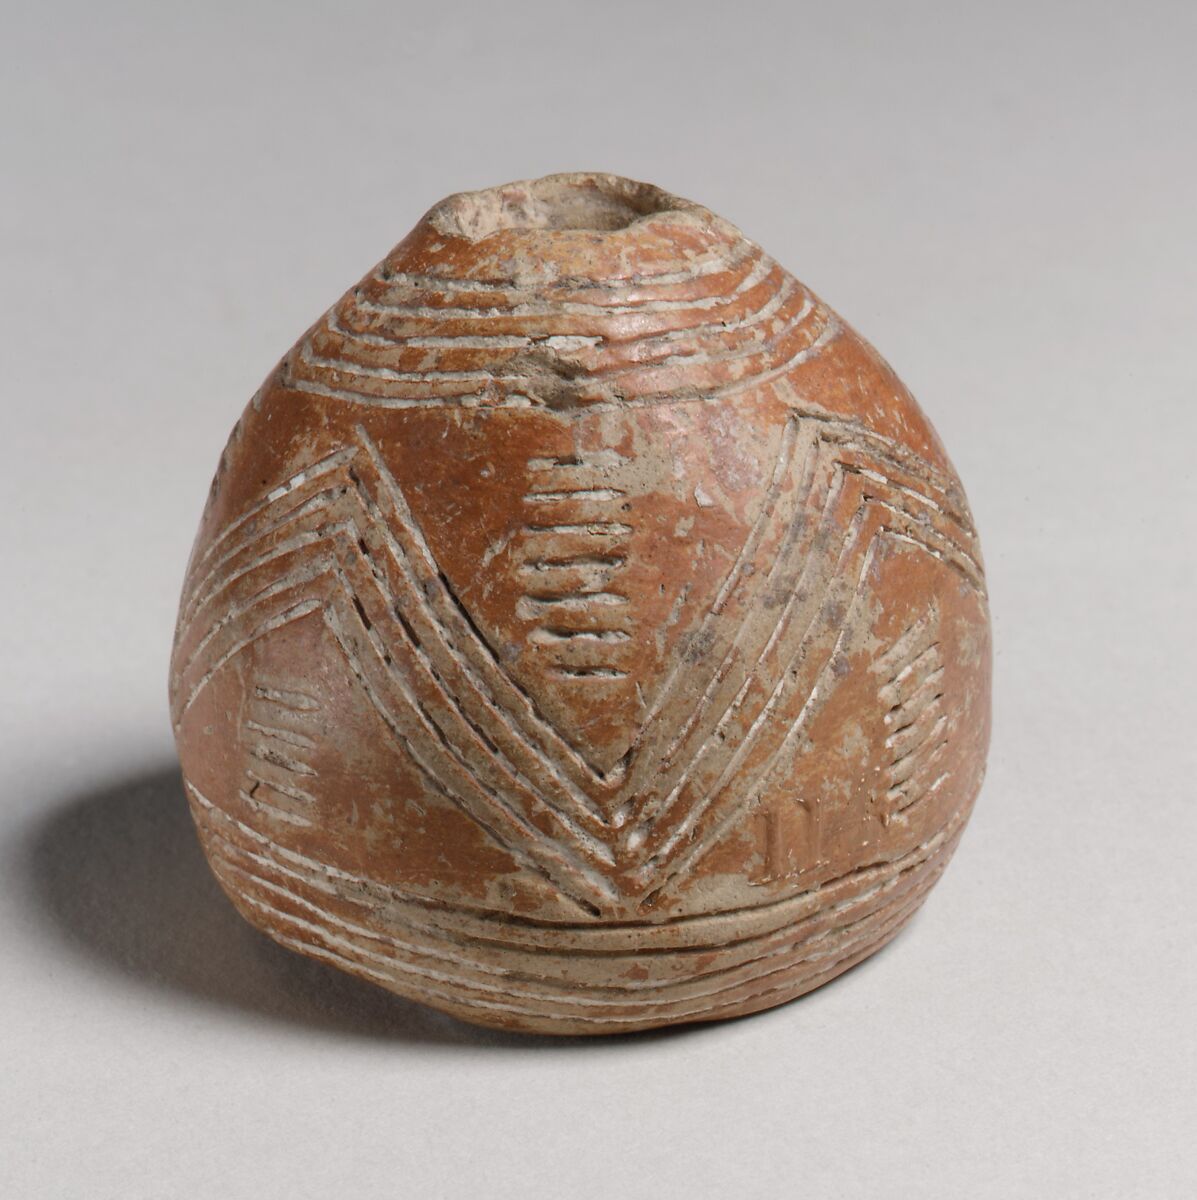 Terracotta spindle whorls, Terracotta, Cypriot 